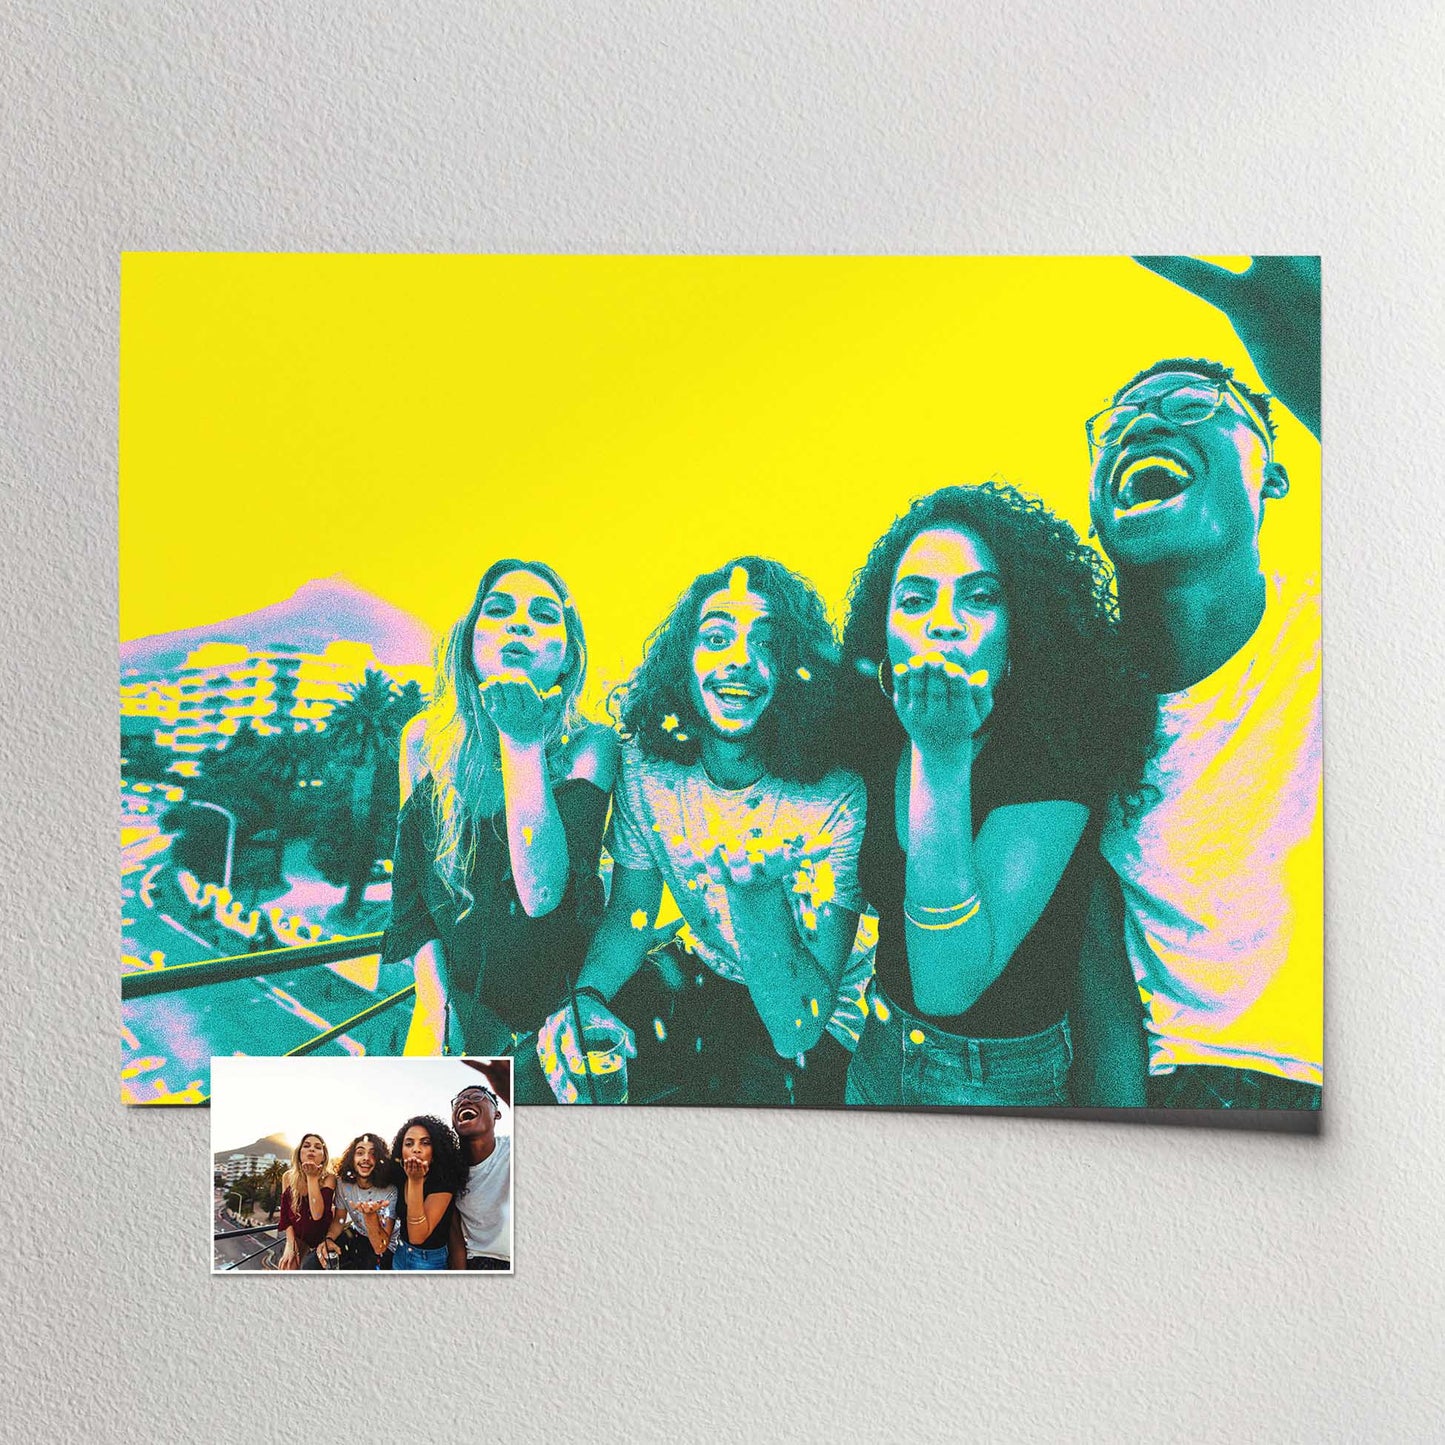 Transform your walls with our Personalised Acid Yellow Print, a fusion of art and design. Its modern aesthetic and vibrant yellow tones bring a fresh energy to any interior. Made to order, this unique piece is the perfect gift for a birthday